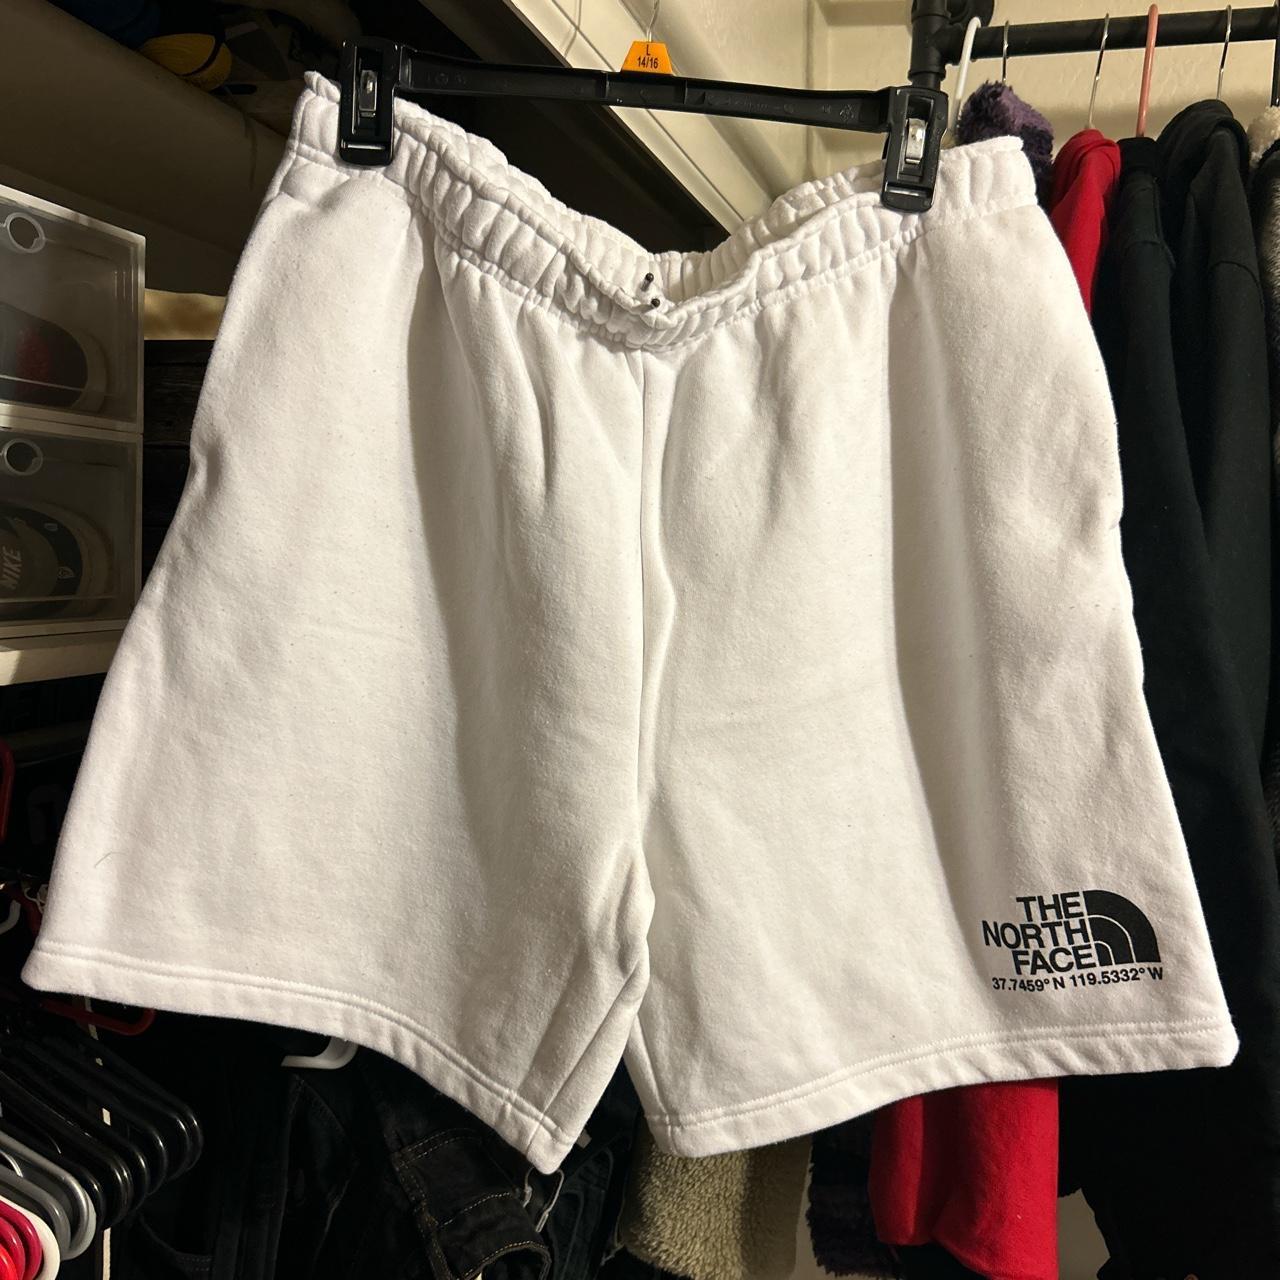 The North Face Men's White Shorts